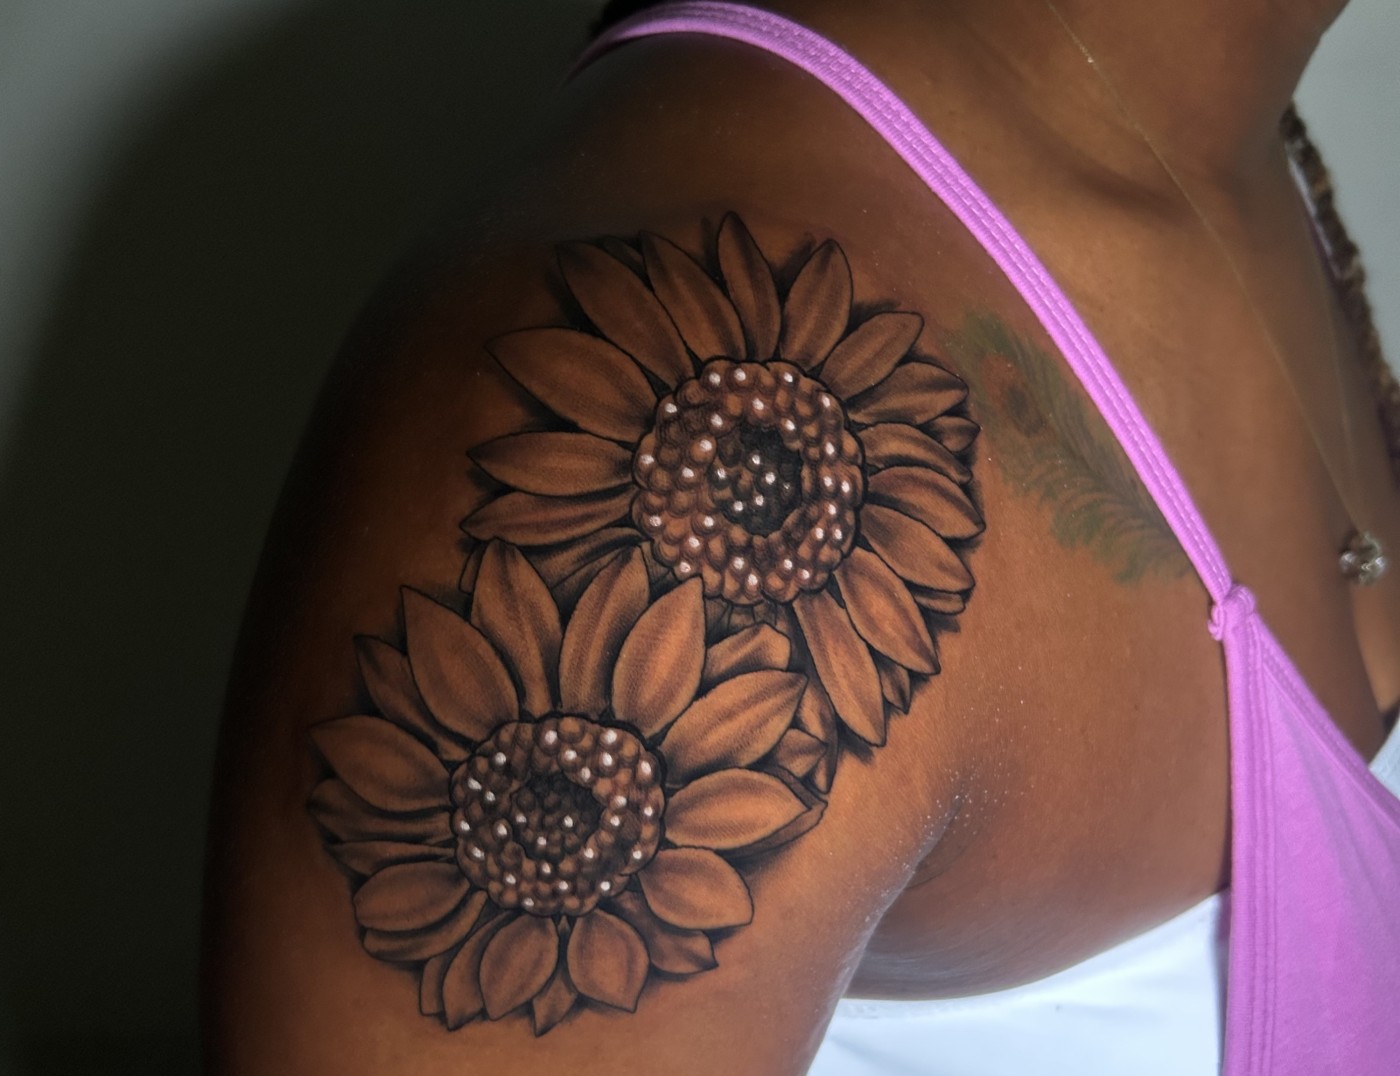 Sunflower Photo Realism Blackwork Tattoo By Lyric TheArtist. We love the attention to detail and the way Lyric uses the skin tone of the muse as "lighting". We're open until 2AM most night. Call 404-973-7828 or stop by for a free consultation with Lyric. Walk-ins are welcome.